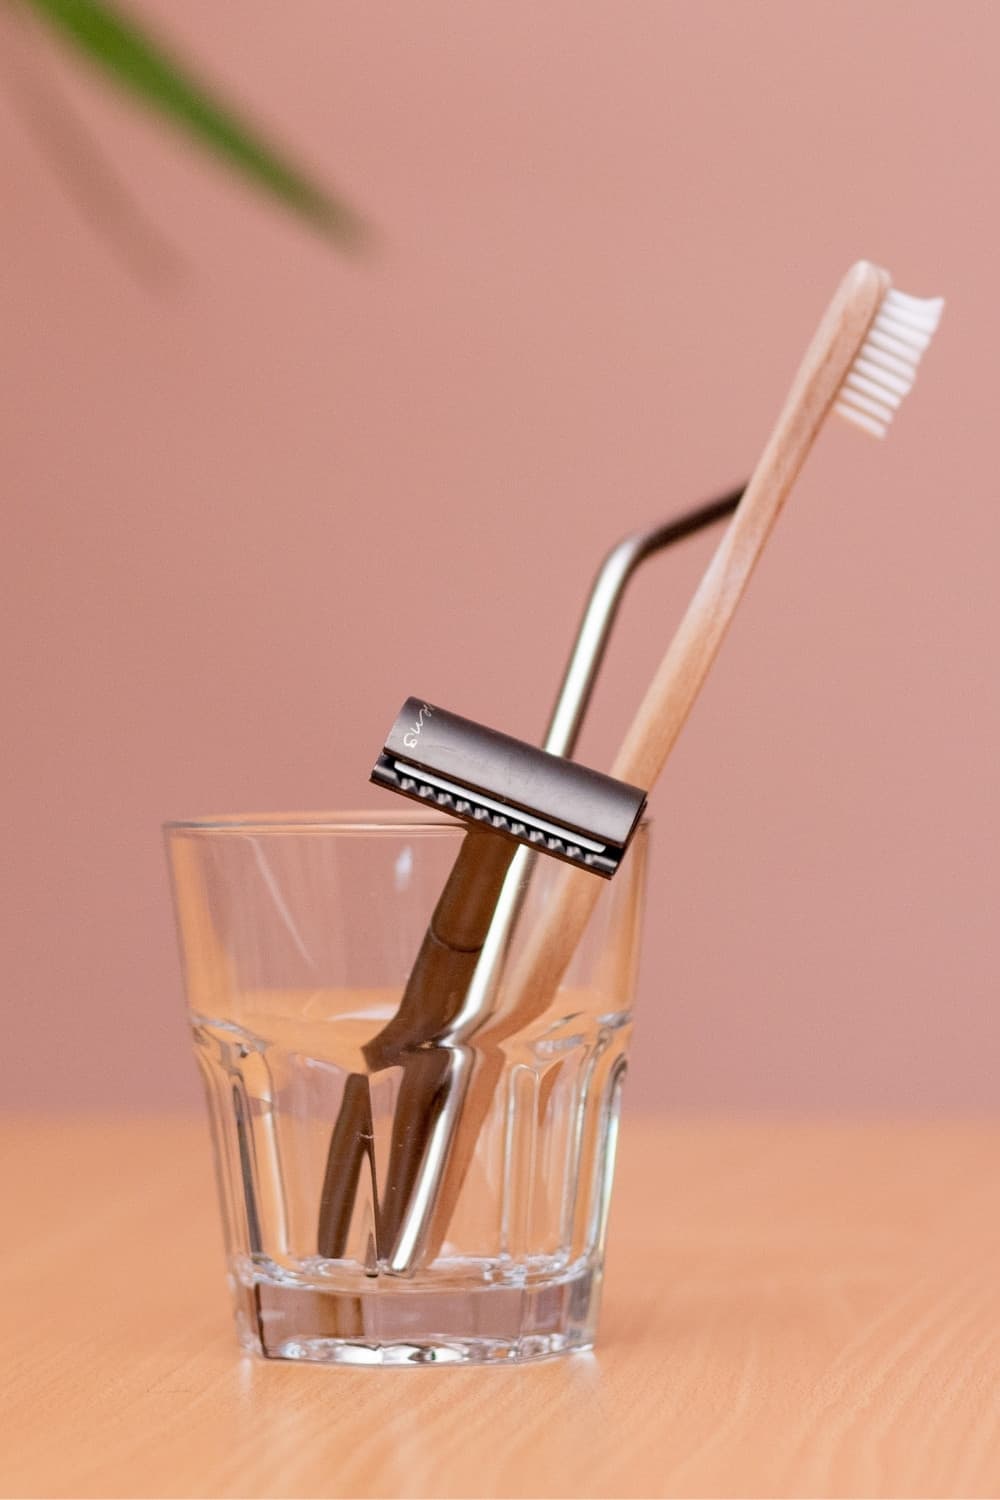 Congrats on switching to an old school razor. Do you know how to clean a safety razor? It’s important to know so you can extend… Image by Oana Cristina via Unsplash #howtocleanasafetyrazor #howtocleanyoursafetyrazor #howtocleandoubleedgesafetyrazor #howtocleanasafetyrazorblades #canyouwashasafetyrazor #howdoyoucleanasafetyrazorafteruse #sustainablejungle